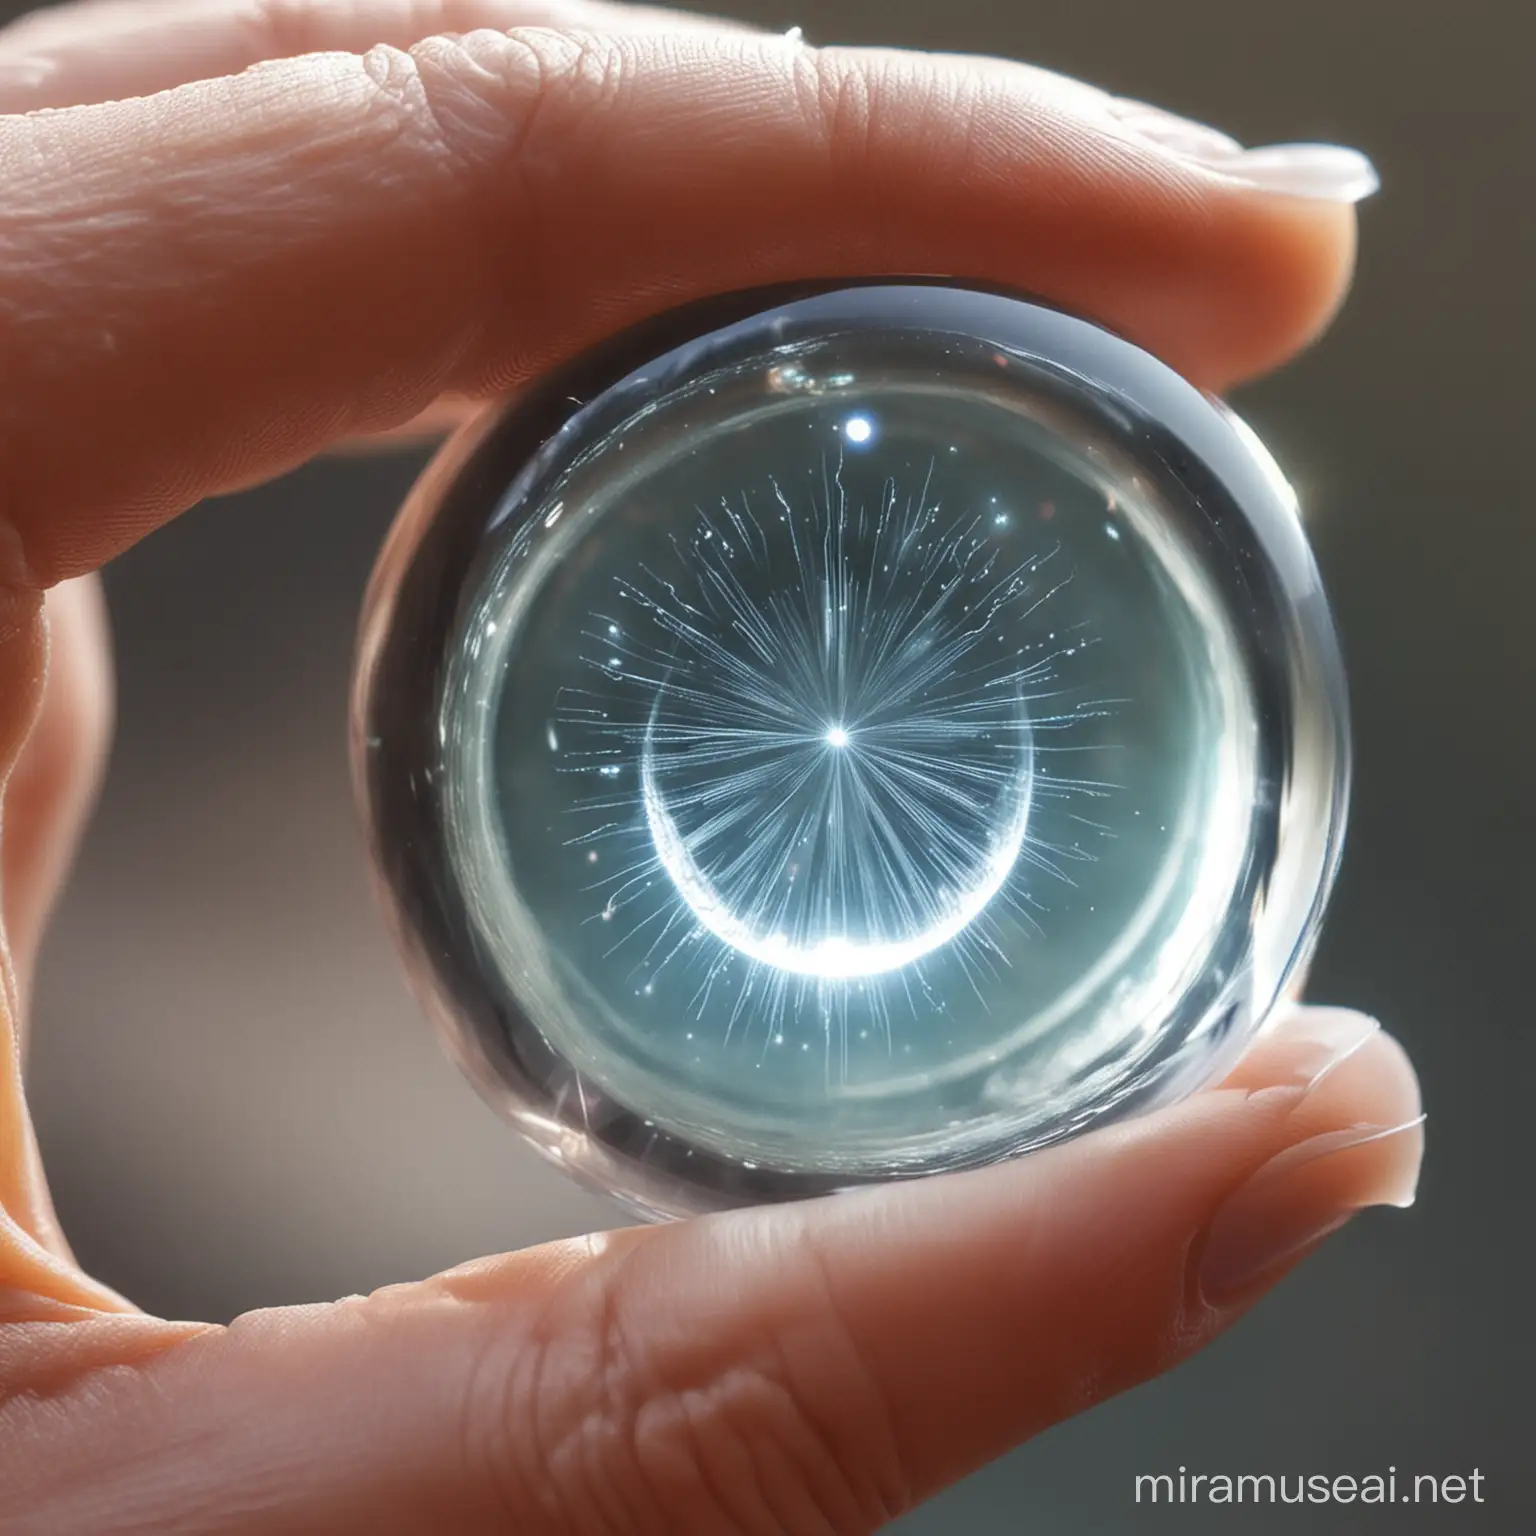 Ethereal Lens: When looked through, this small crystal lens allows the user to see into the ethereal plane, where spirits reside. It grants the ability to see ghosts and communicate with them. 